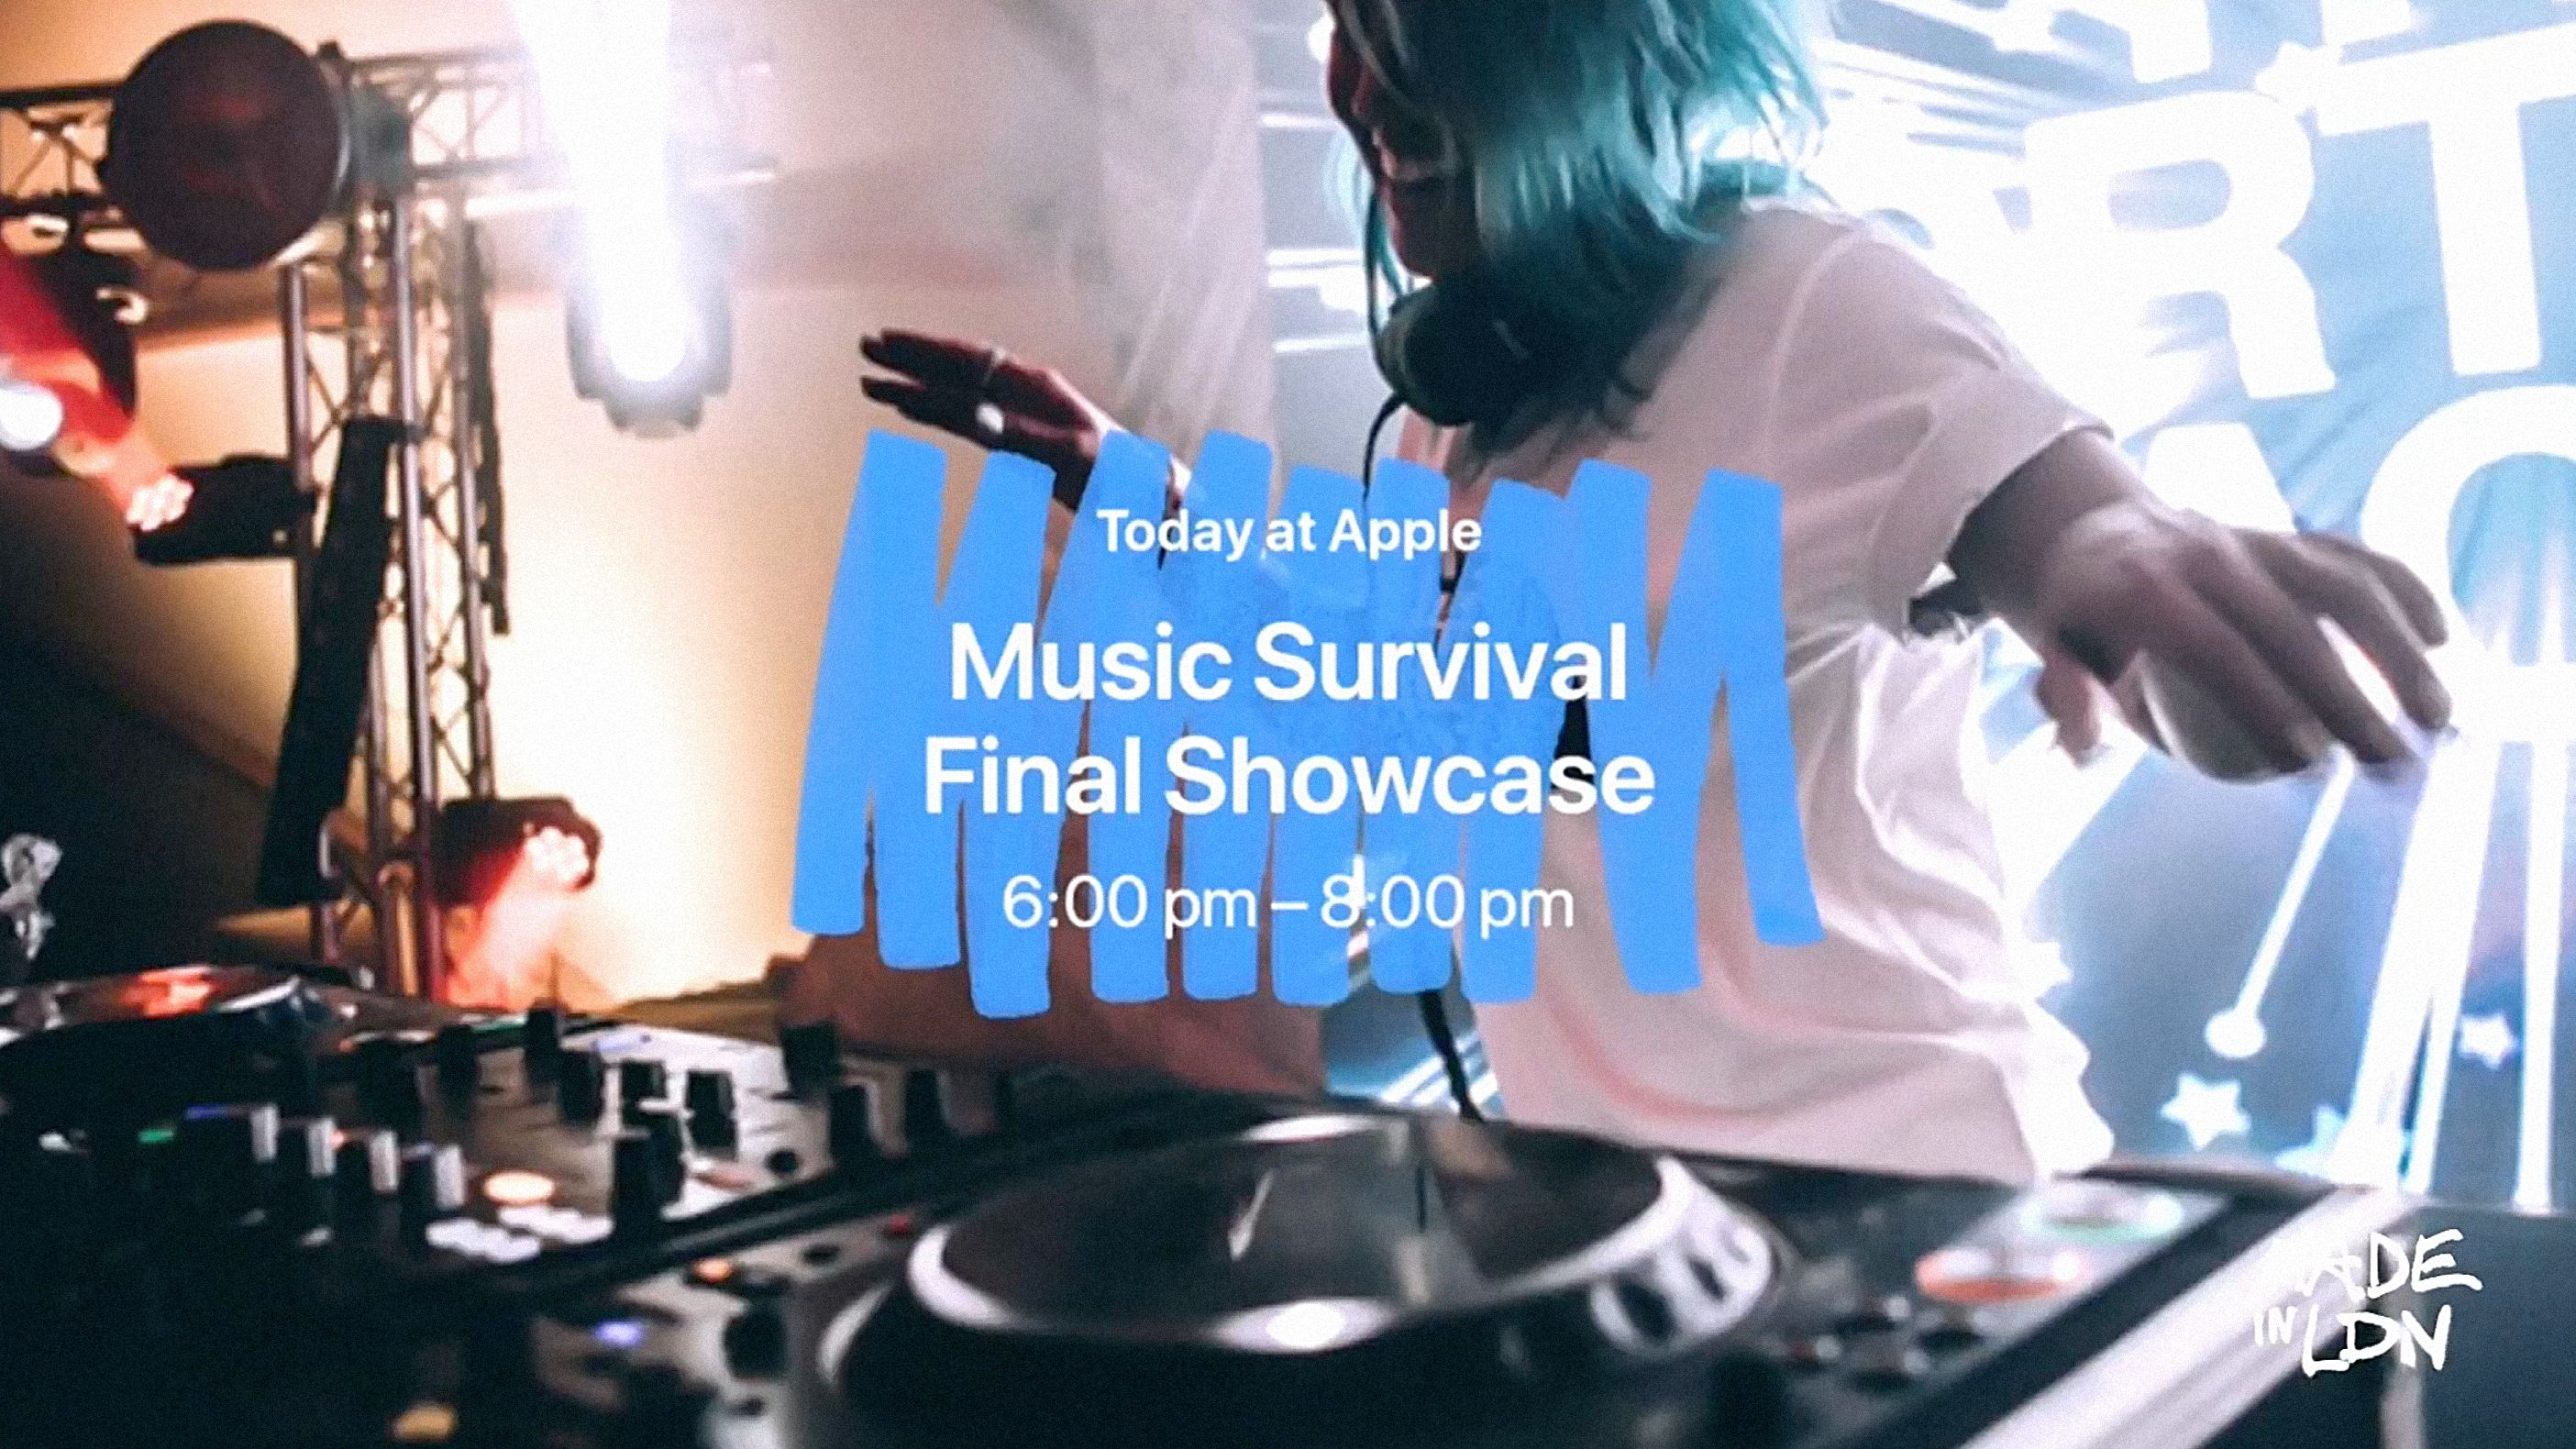 landdistrikterne kalligrafi Råd Young London artists share their music in Today at Apple's Music Survival  Final Showcase - 9to5Mac